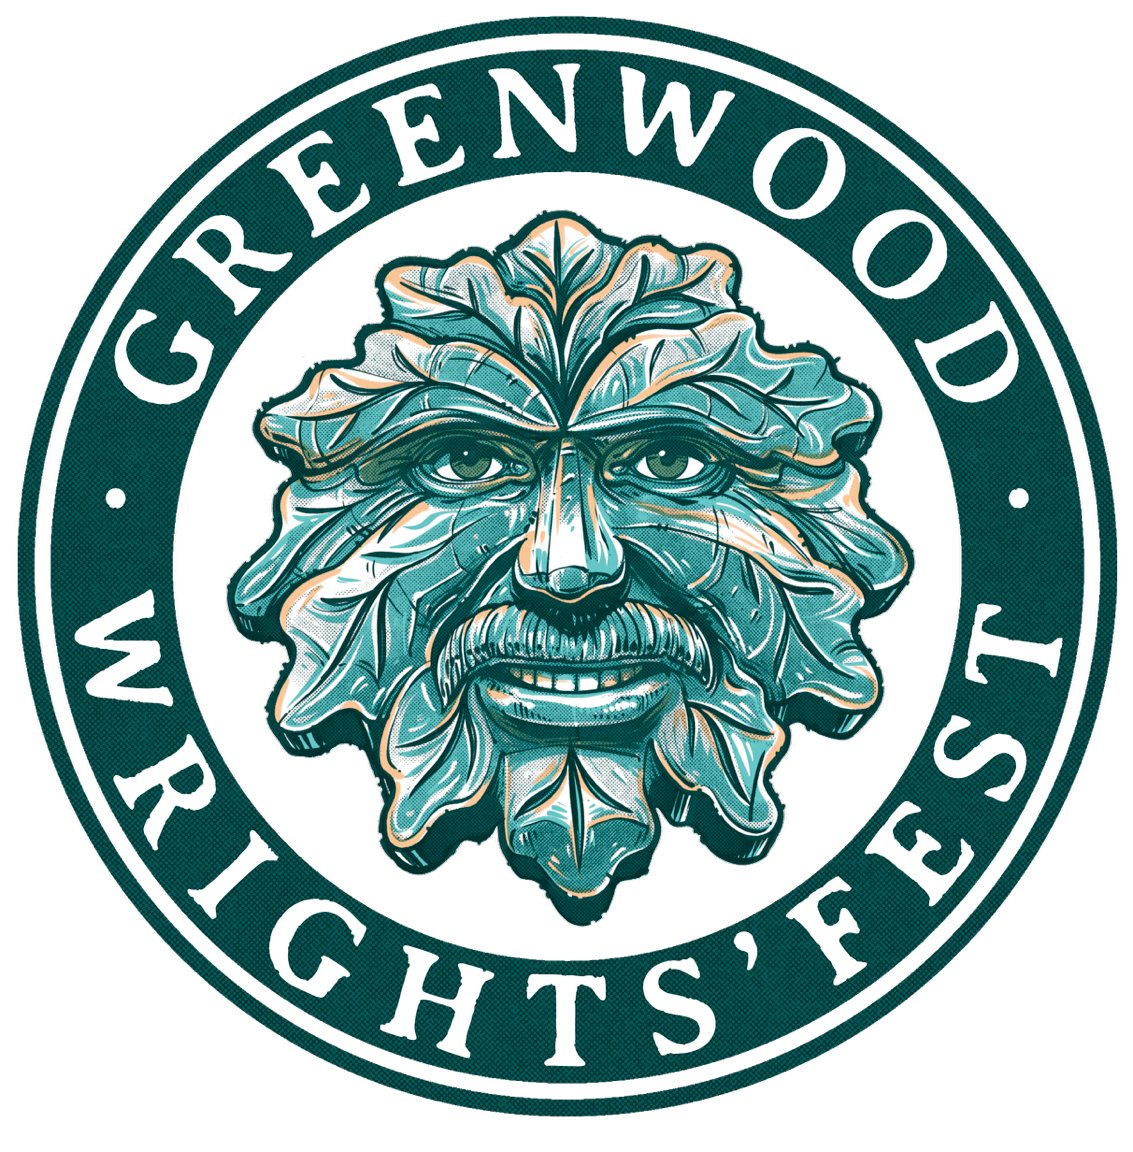 The logo for the Greenwood Wrights'Fest, scheduled for April 22-24 at Shakori Hills.